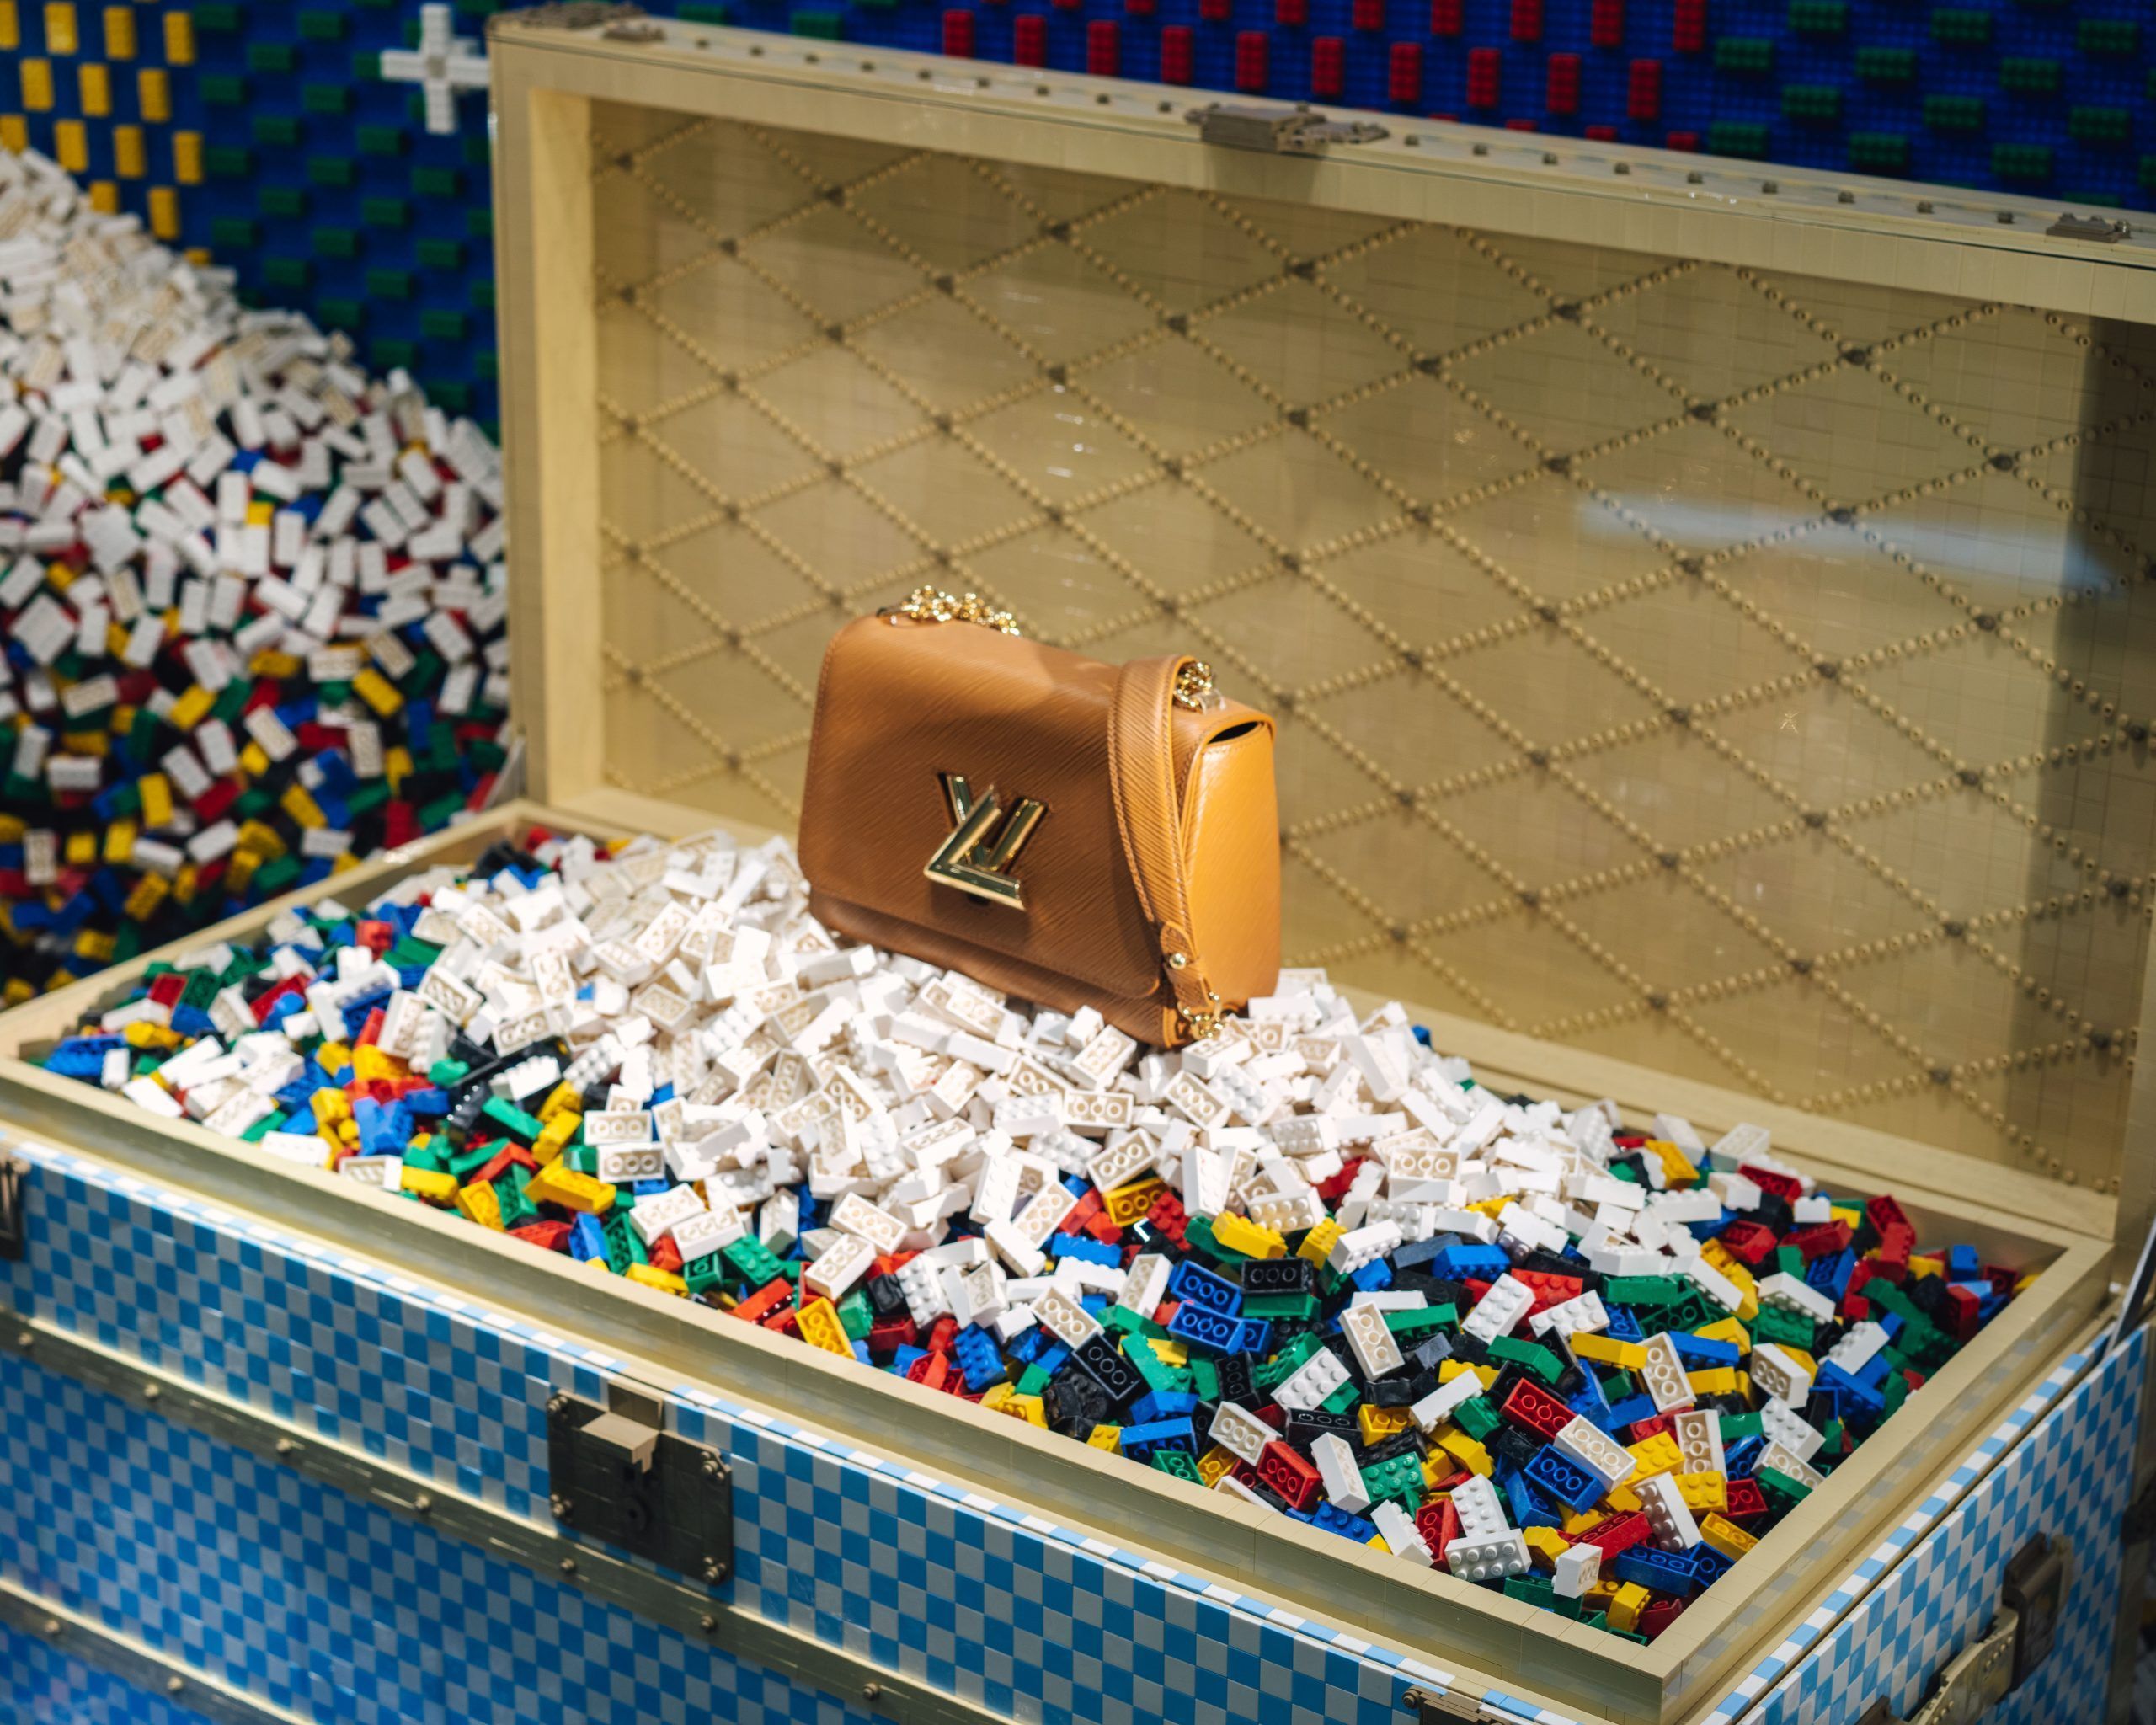 Louis Vuitton and LEGO collaborate for holiday displays this